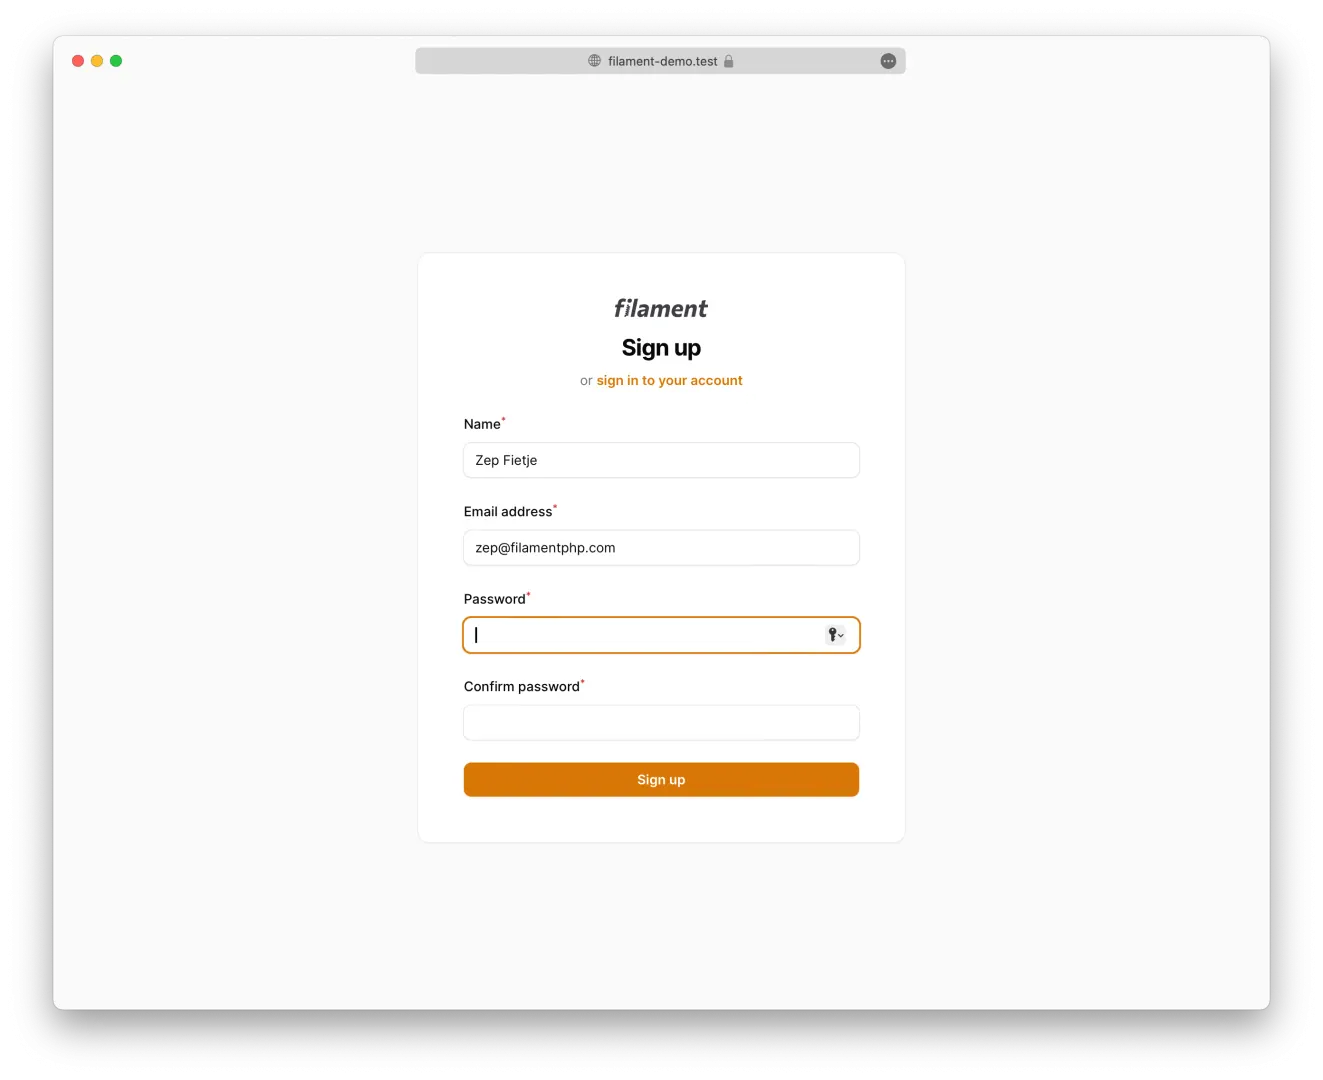 Screenshot of the registration page in light mode using the default Filament theme